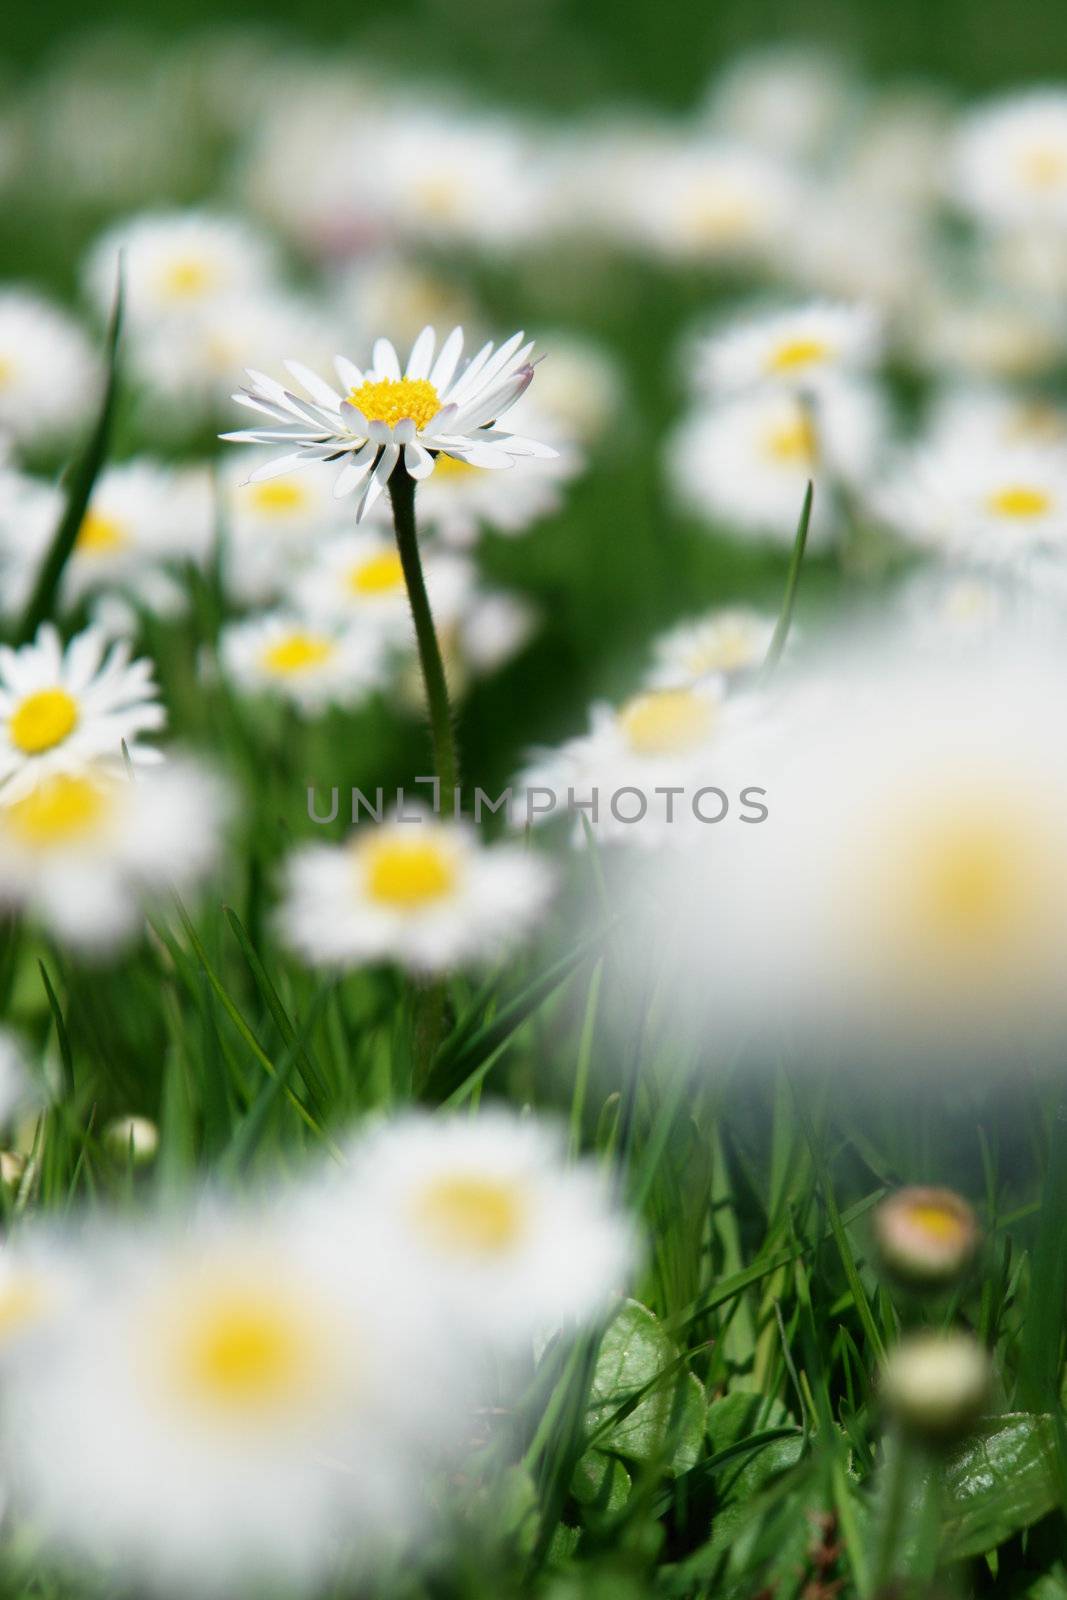 Daisies in the meadow at spring time